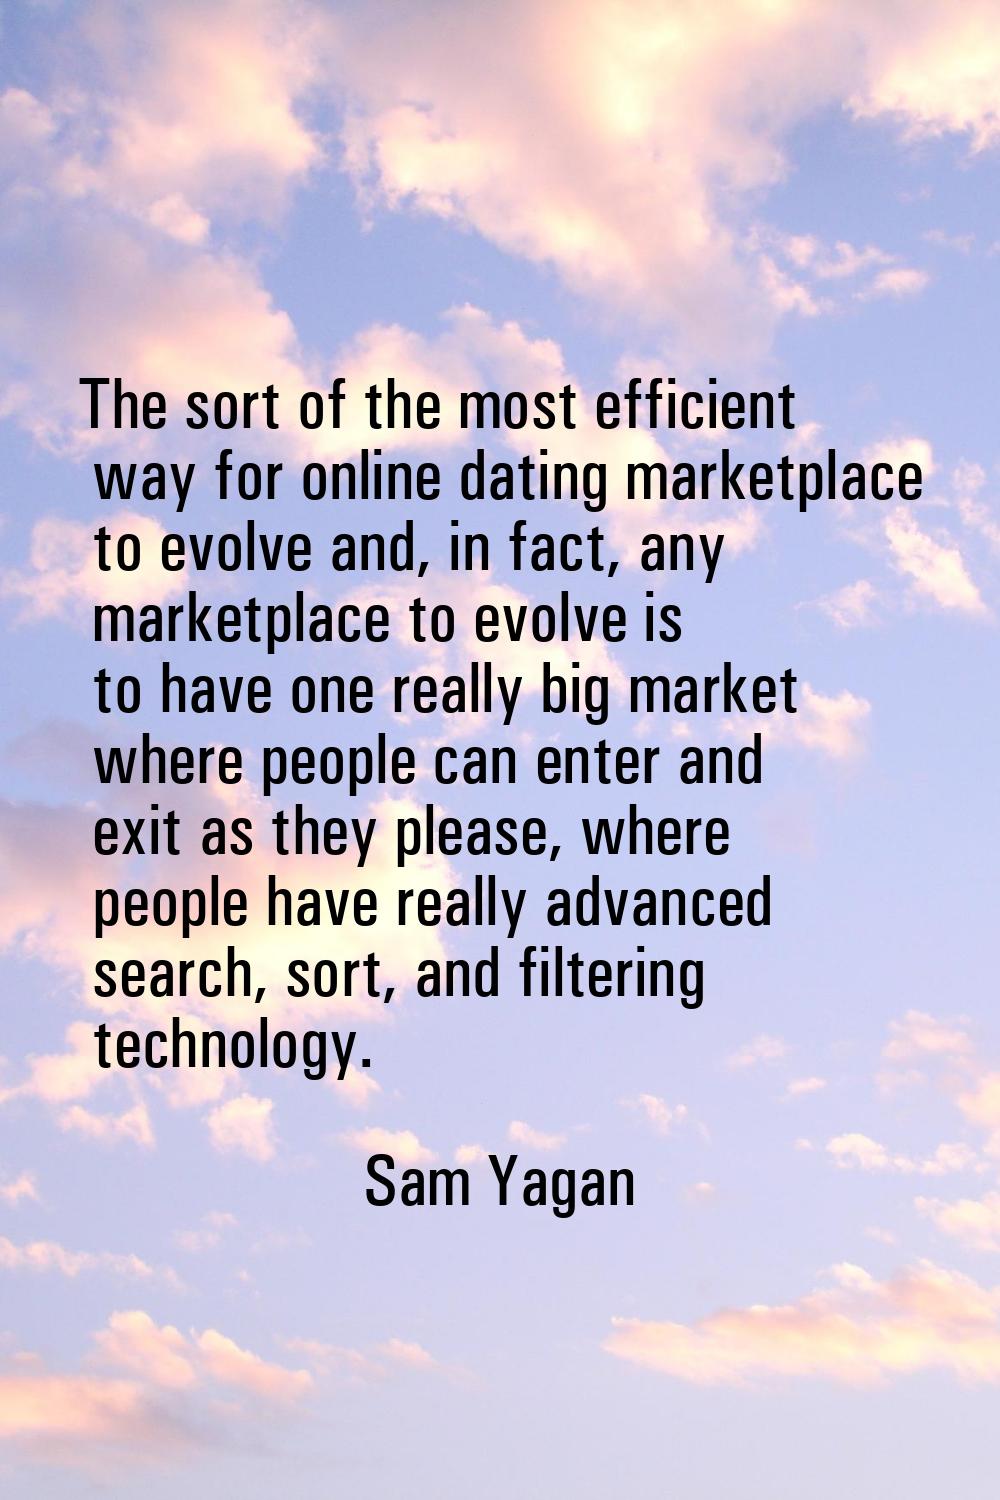 The sort of the most efficient way for online dating marketplace to evolve and, in fact, any market